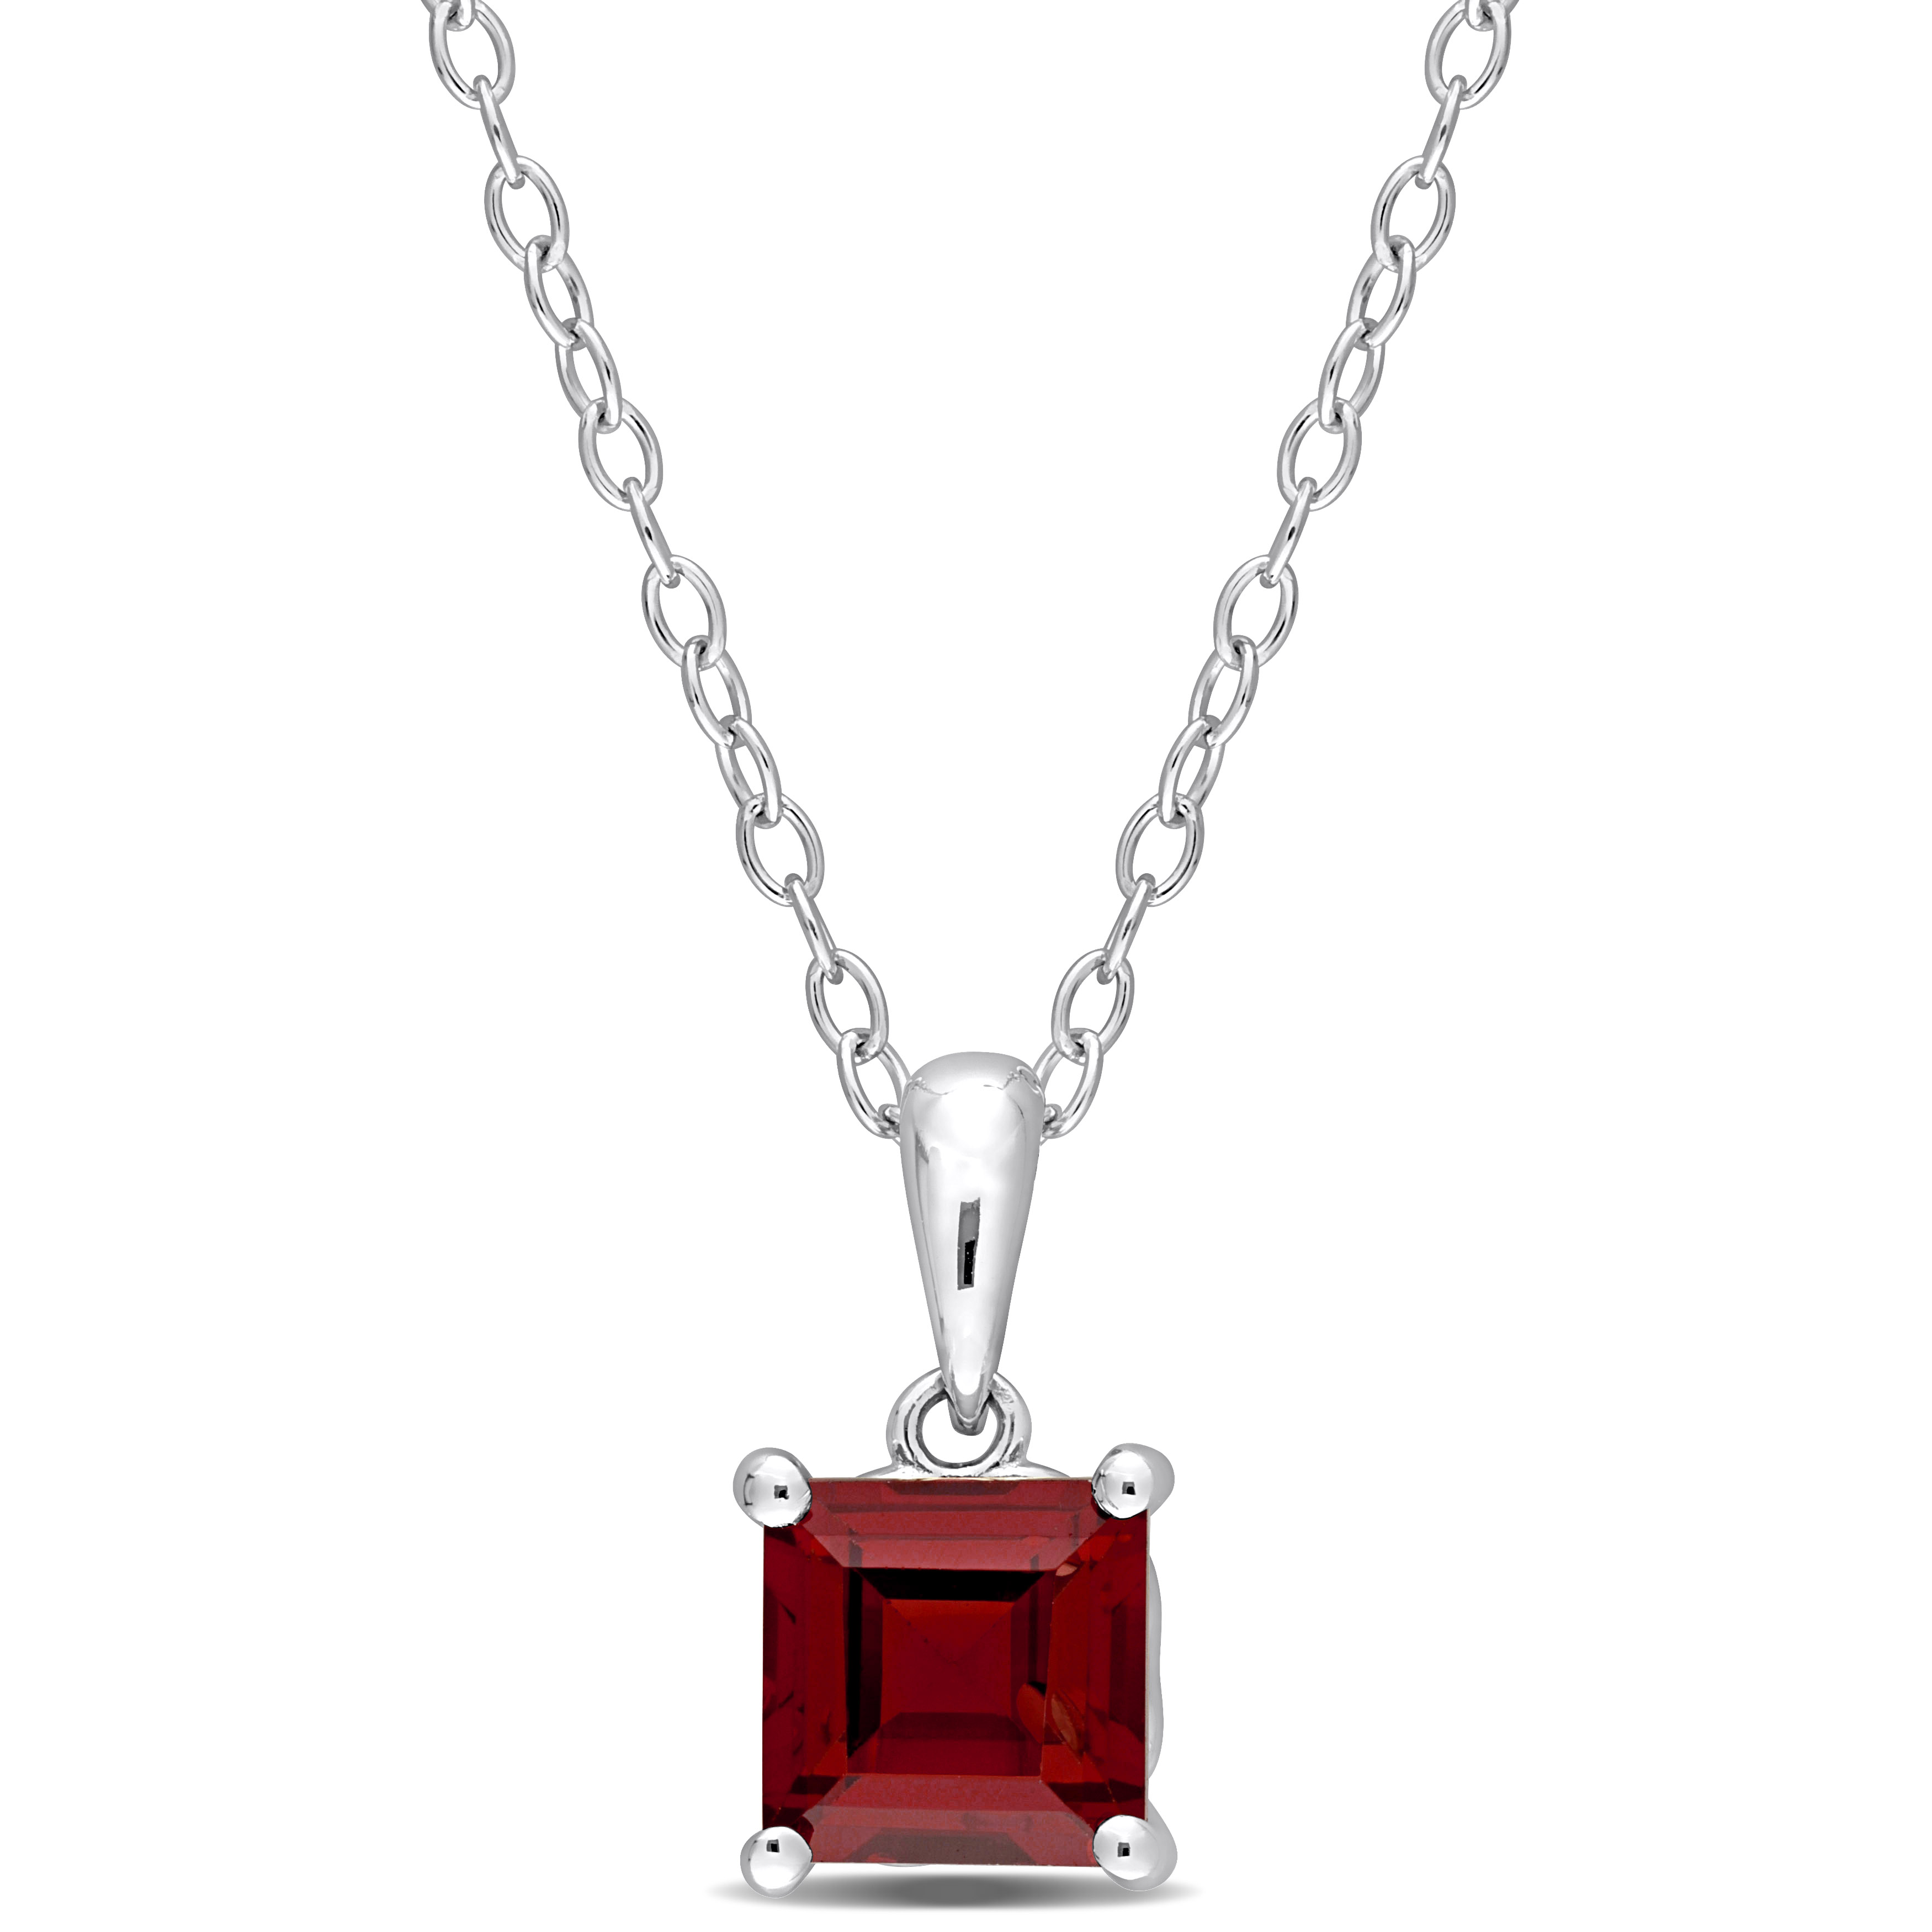 1 3/8 CT TGW Princess Cut Garnet Solitaire Heart Design Pendant with Chain in Sterling Silver - 18 in.